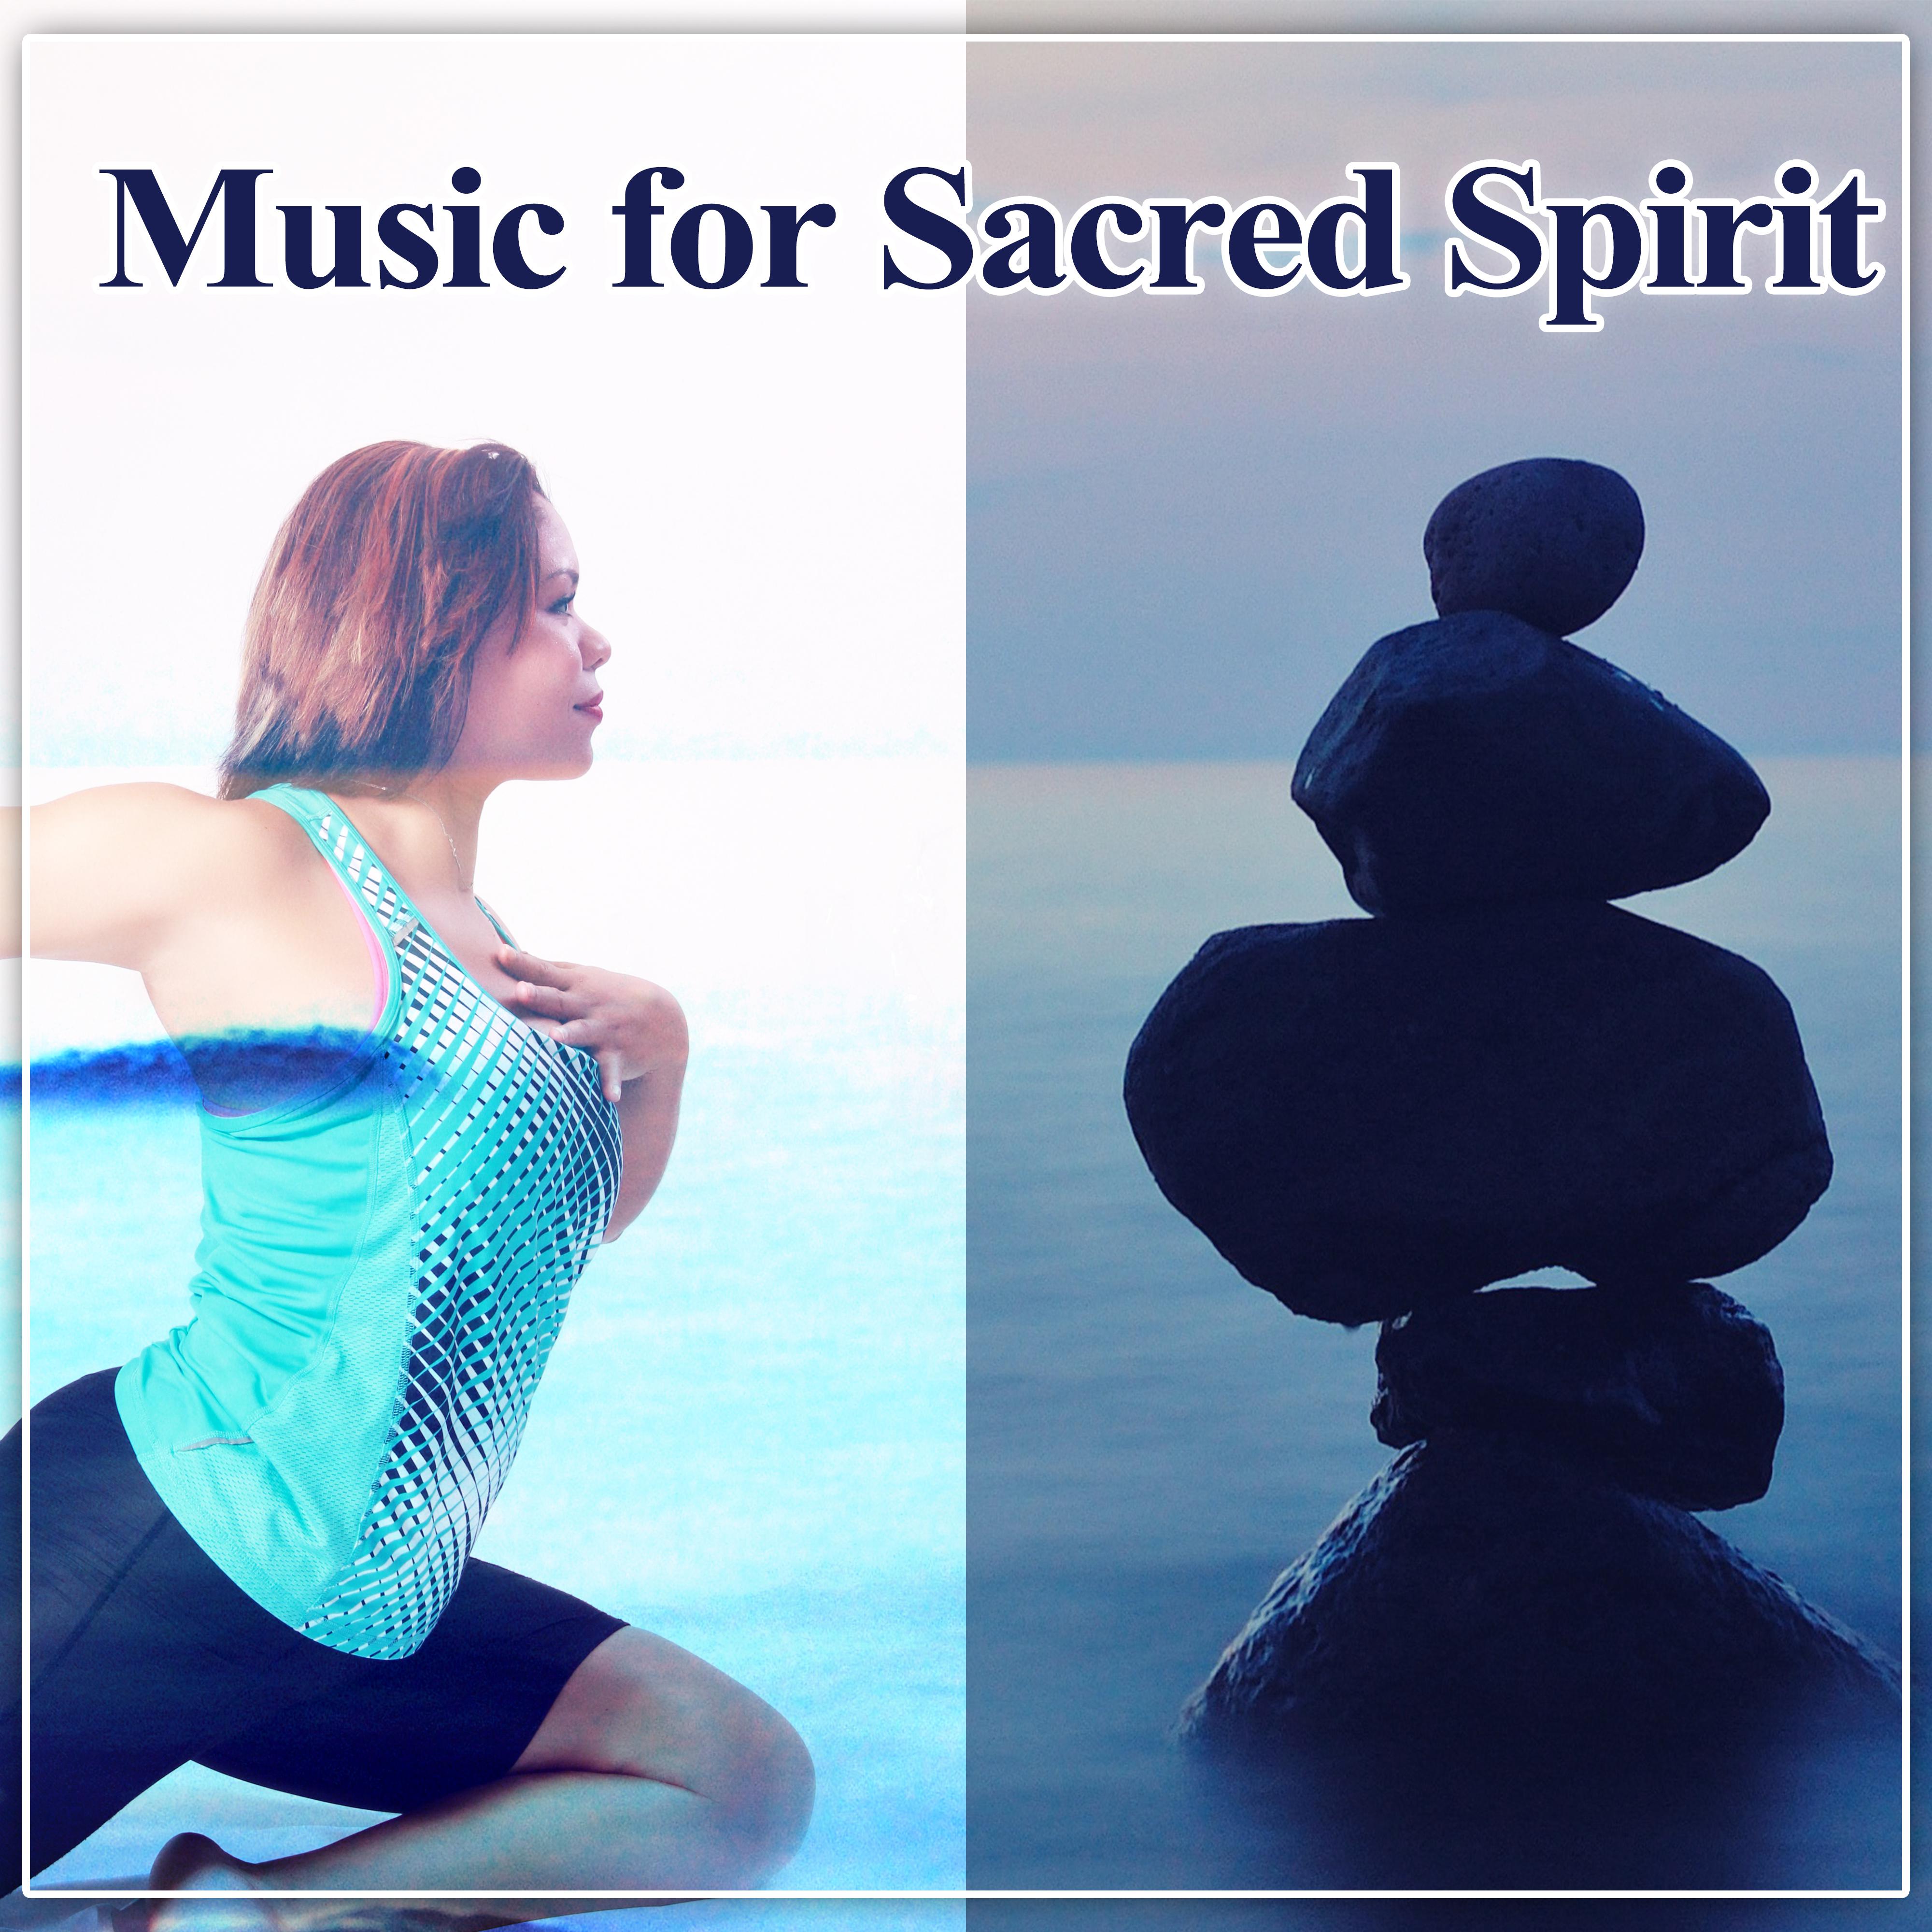 Music for Sacred Spirit – Meditation New Age Music, Calming Nature Sounds, Healing Waves, Soft Music